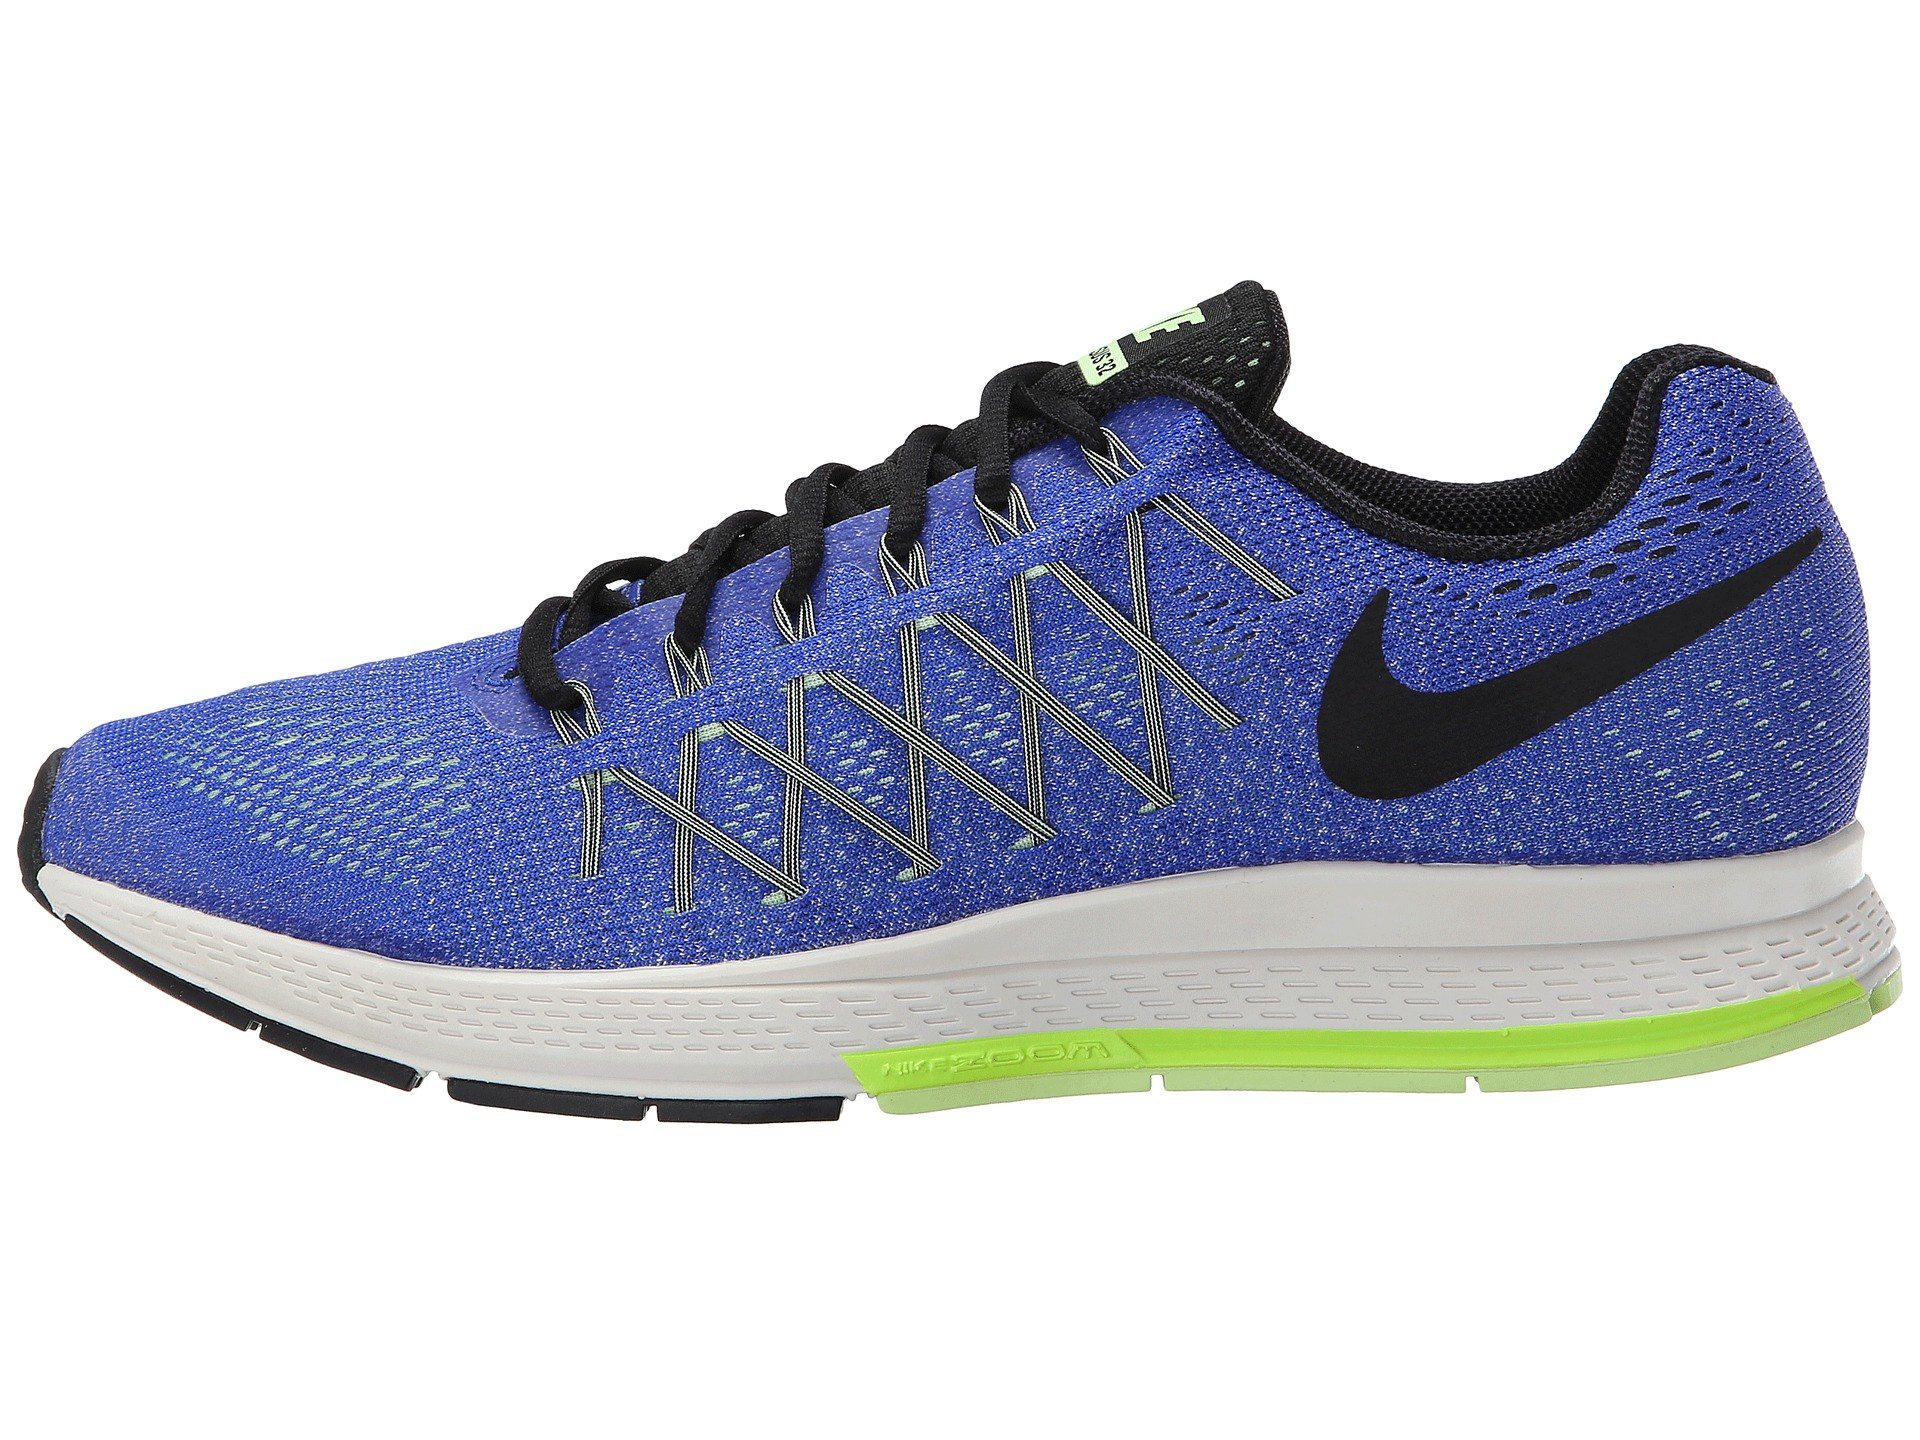 What Should You Wear While Traveling In Japan - Comfortable Walking Shoes - Nike Mens Air Zoom Pegasus